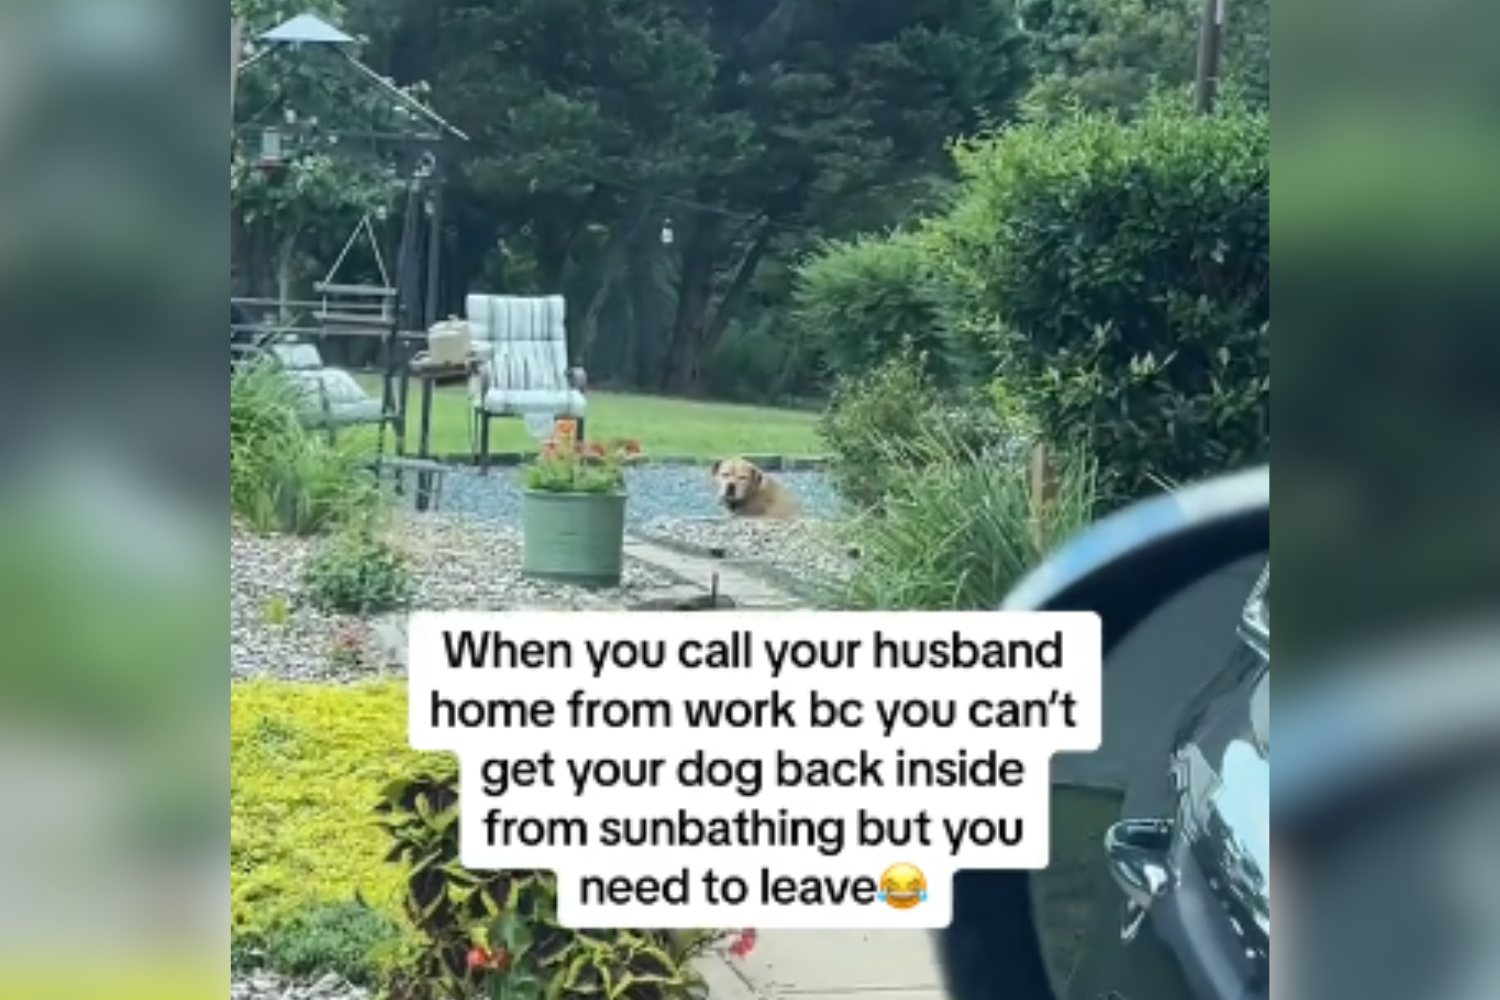 Woman in standoff with "sunbathing dog"—So she calls husband home from work